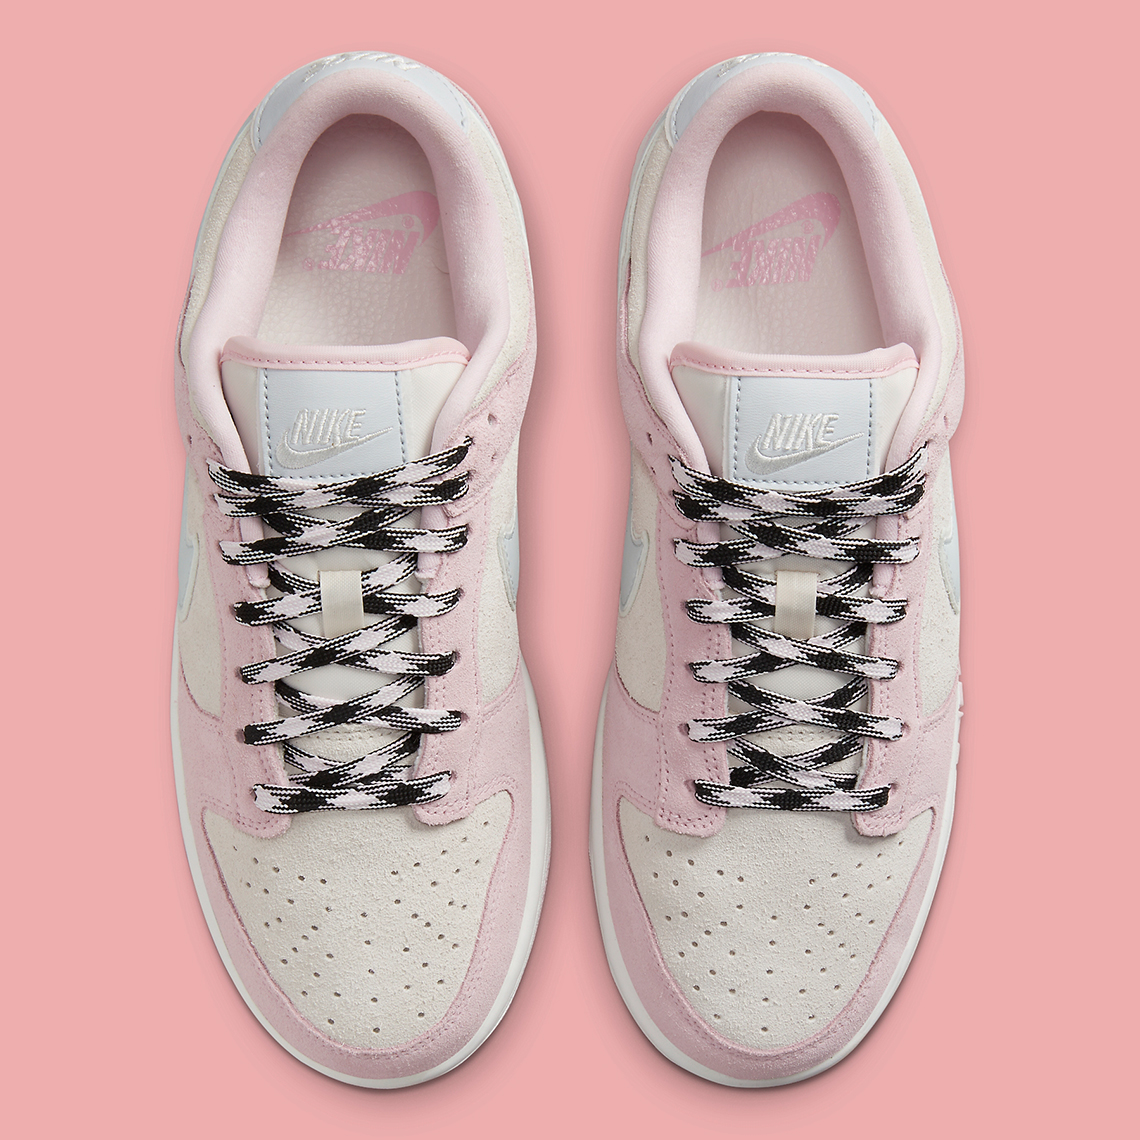 Pink Foam: Nike Dunk Low “Pink Foam” shoes: Release date, price, and more  details explored